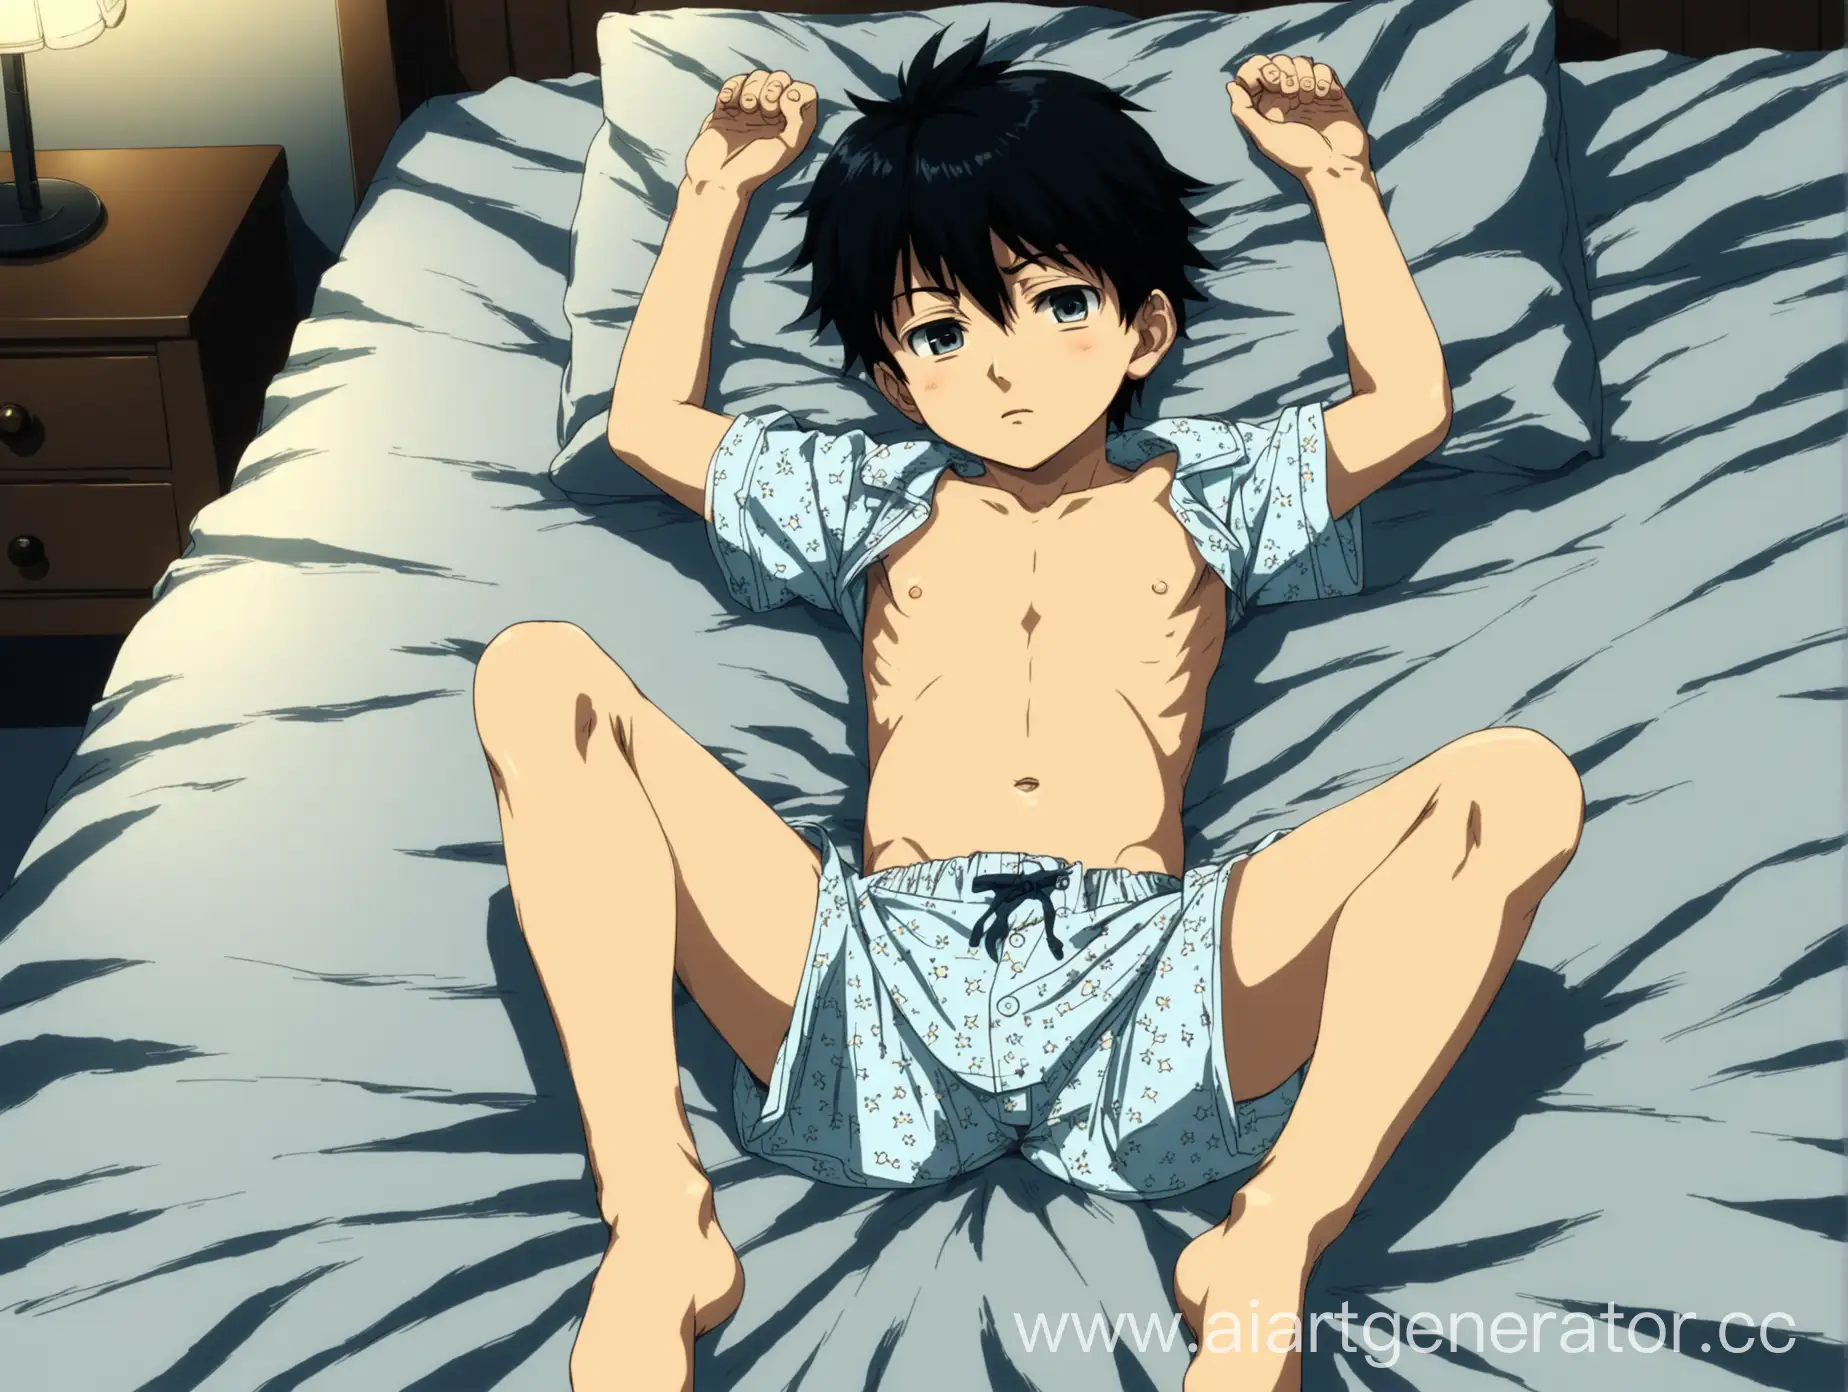 A little boy lies on the bed in a pajama shirt and boxers with his legs spread. Anime style.